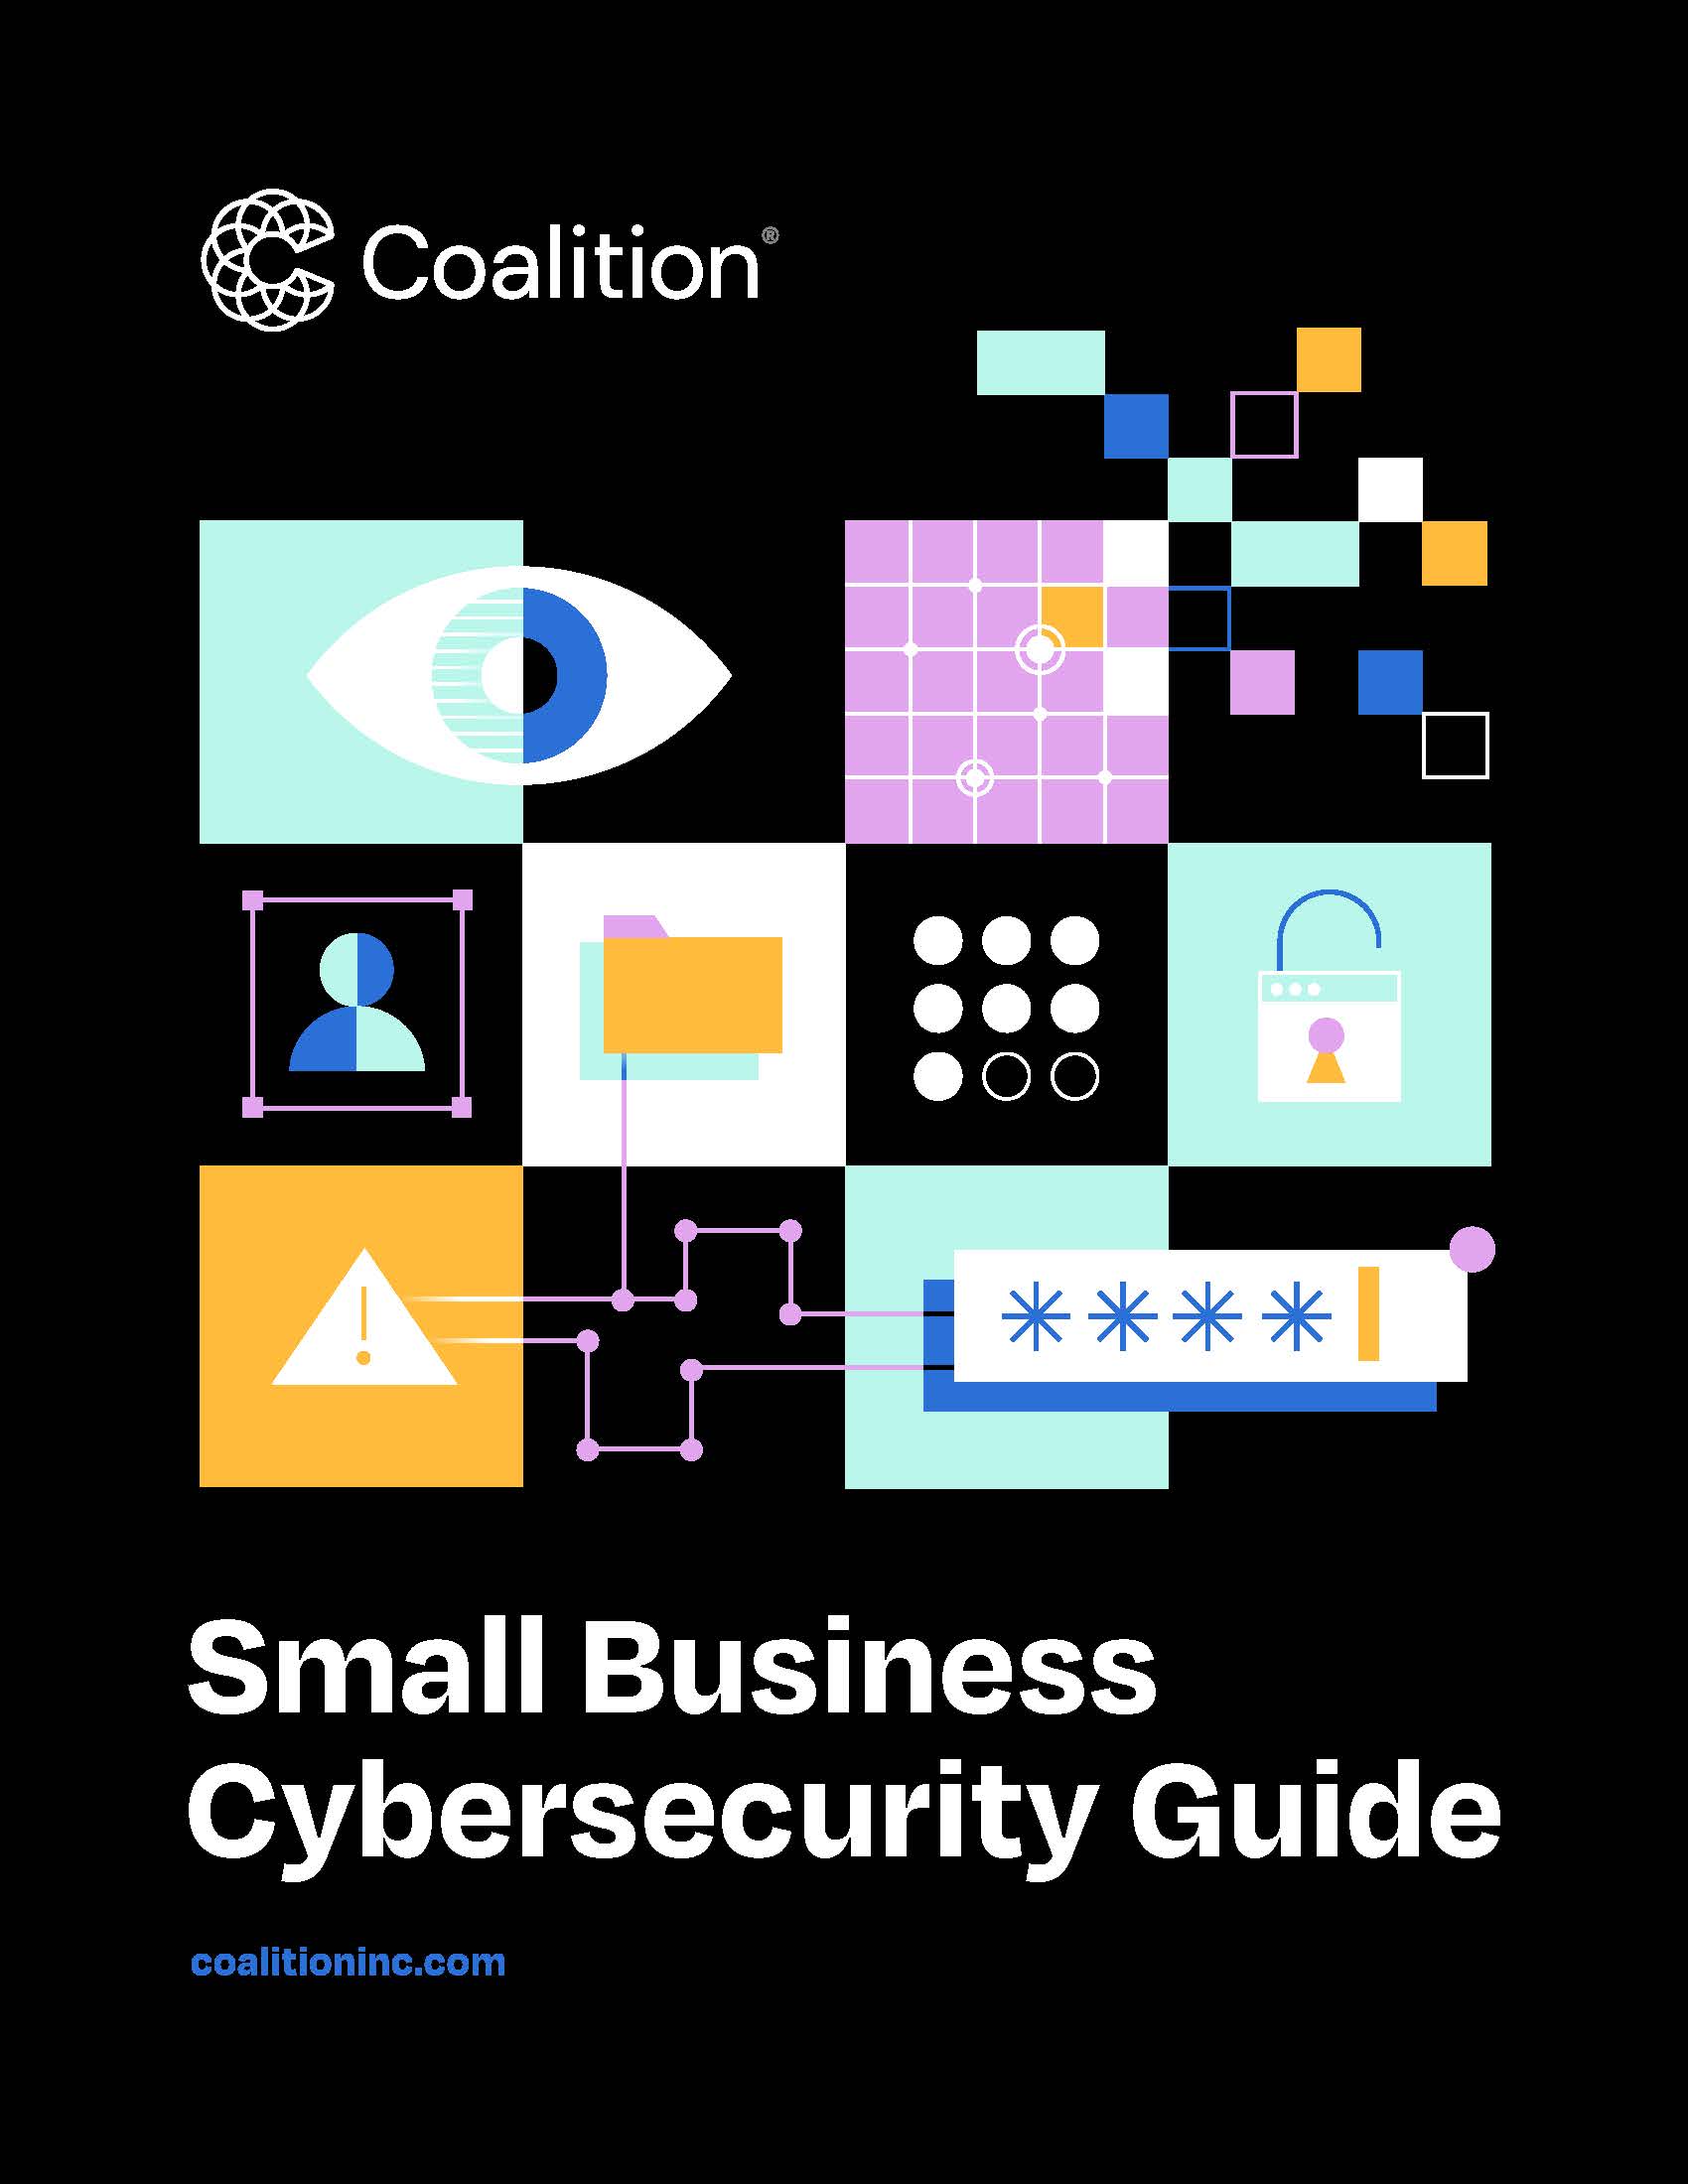 Cybersecurity-Guide-cover.jpg